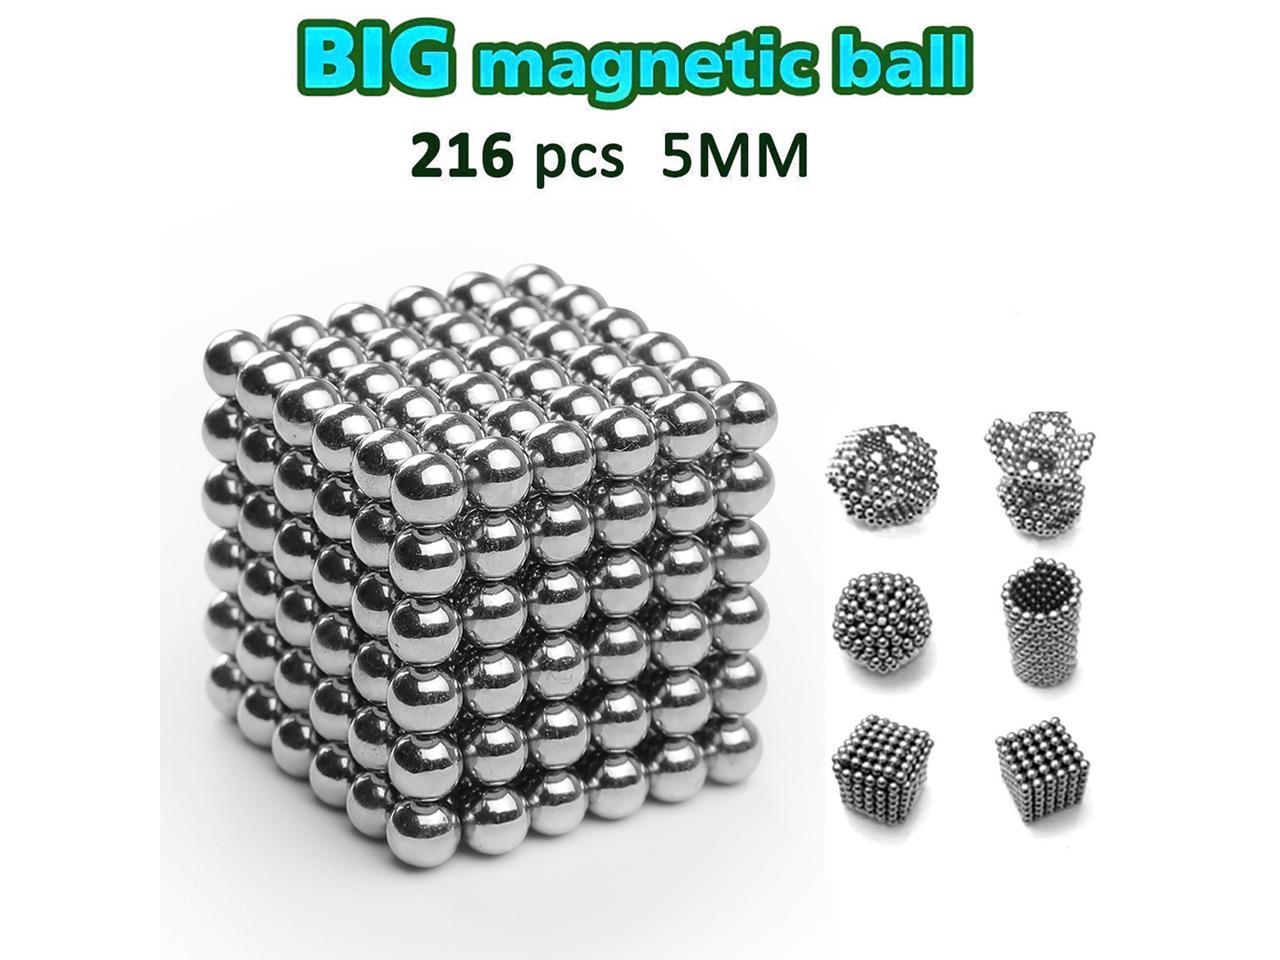 Aomeiter 5MM 216 Pieces Multicolored Magnetic Balls MagnetsToys Sculpture Building Magnetic Blocks Magnet Cube Gift for Intellectual Development Office Toy Stress Relief Gift for Teens and Adult 8 Color by JZKJ